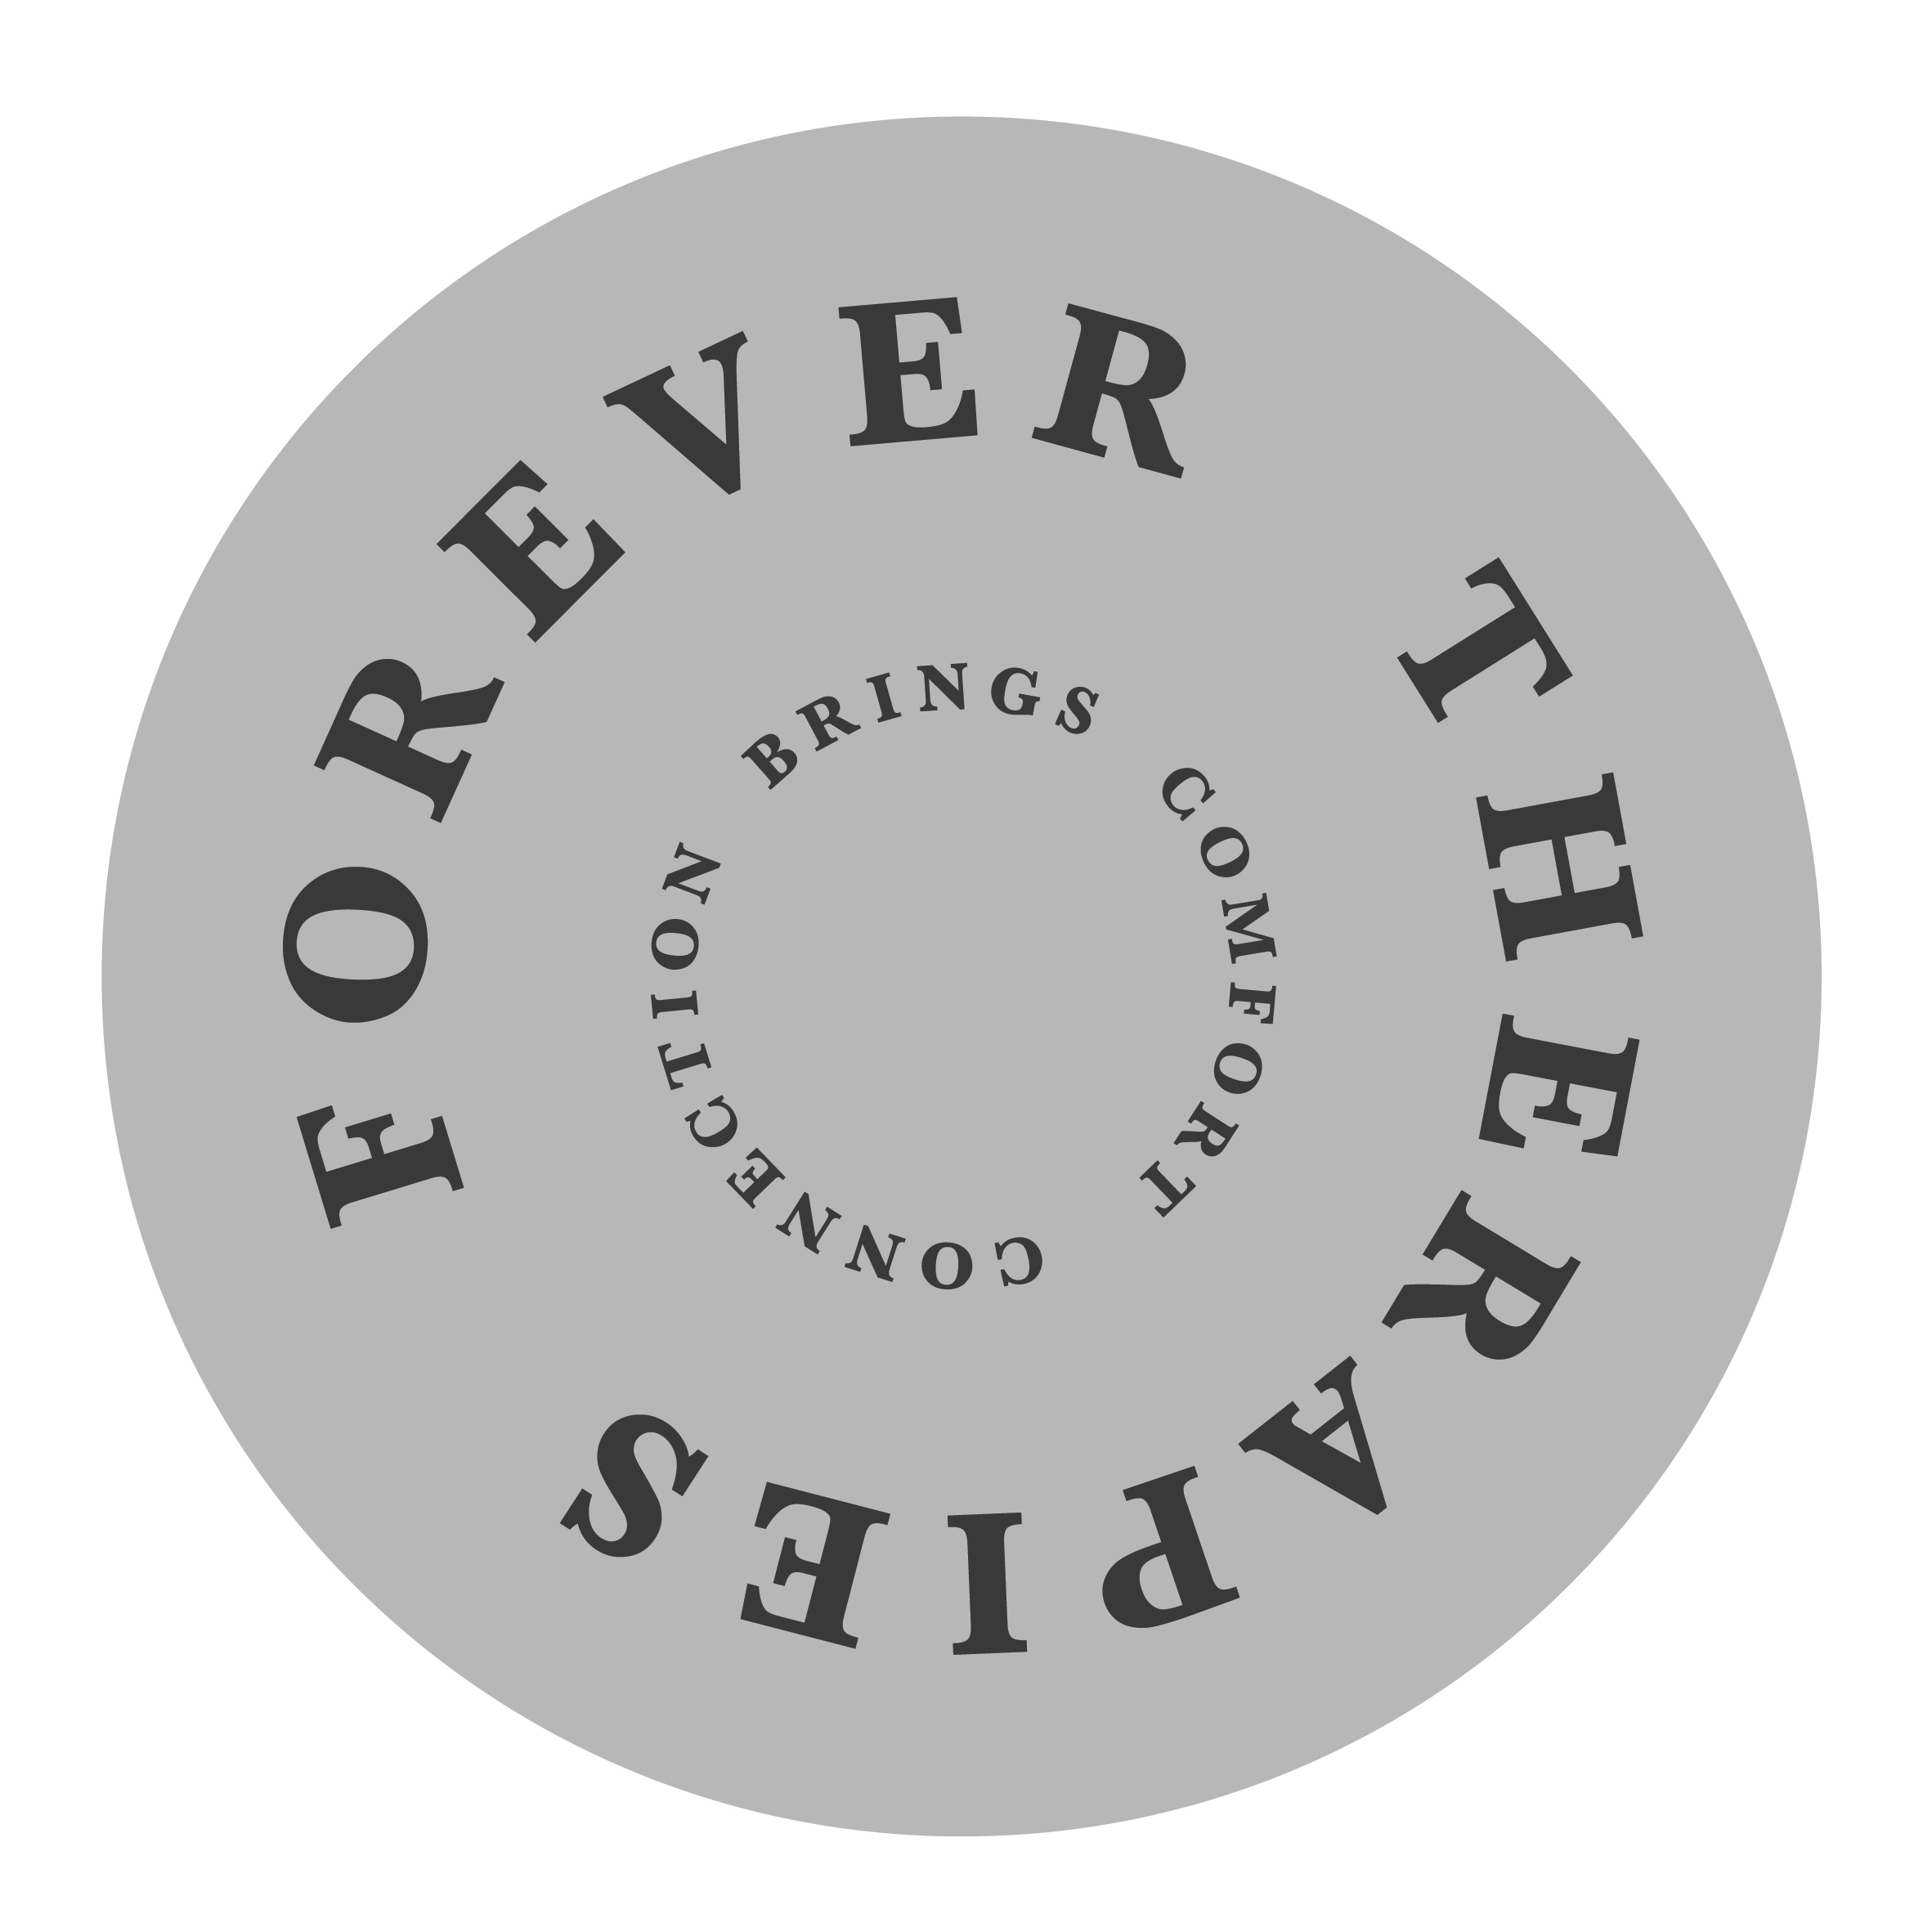 forever-therapies-1-1-1-1-1-1.png